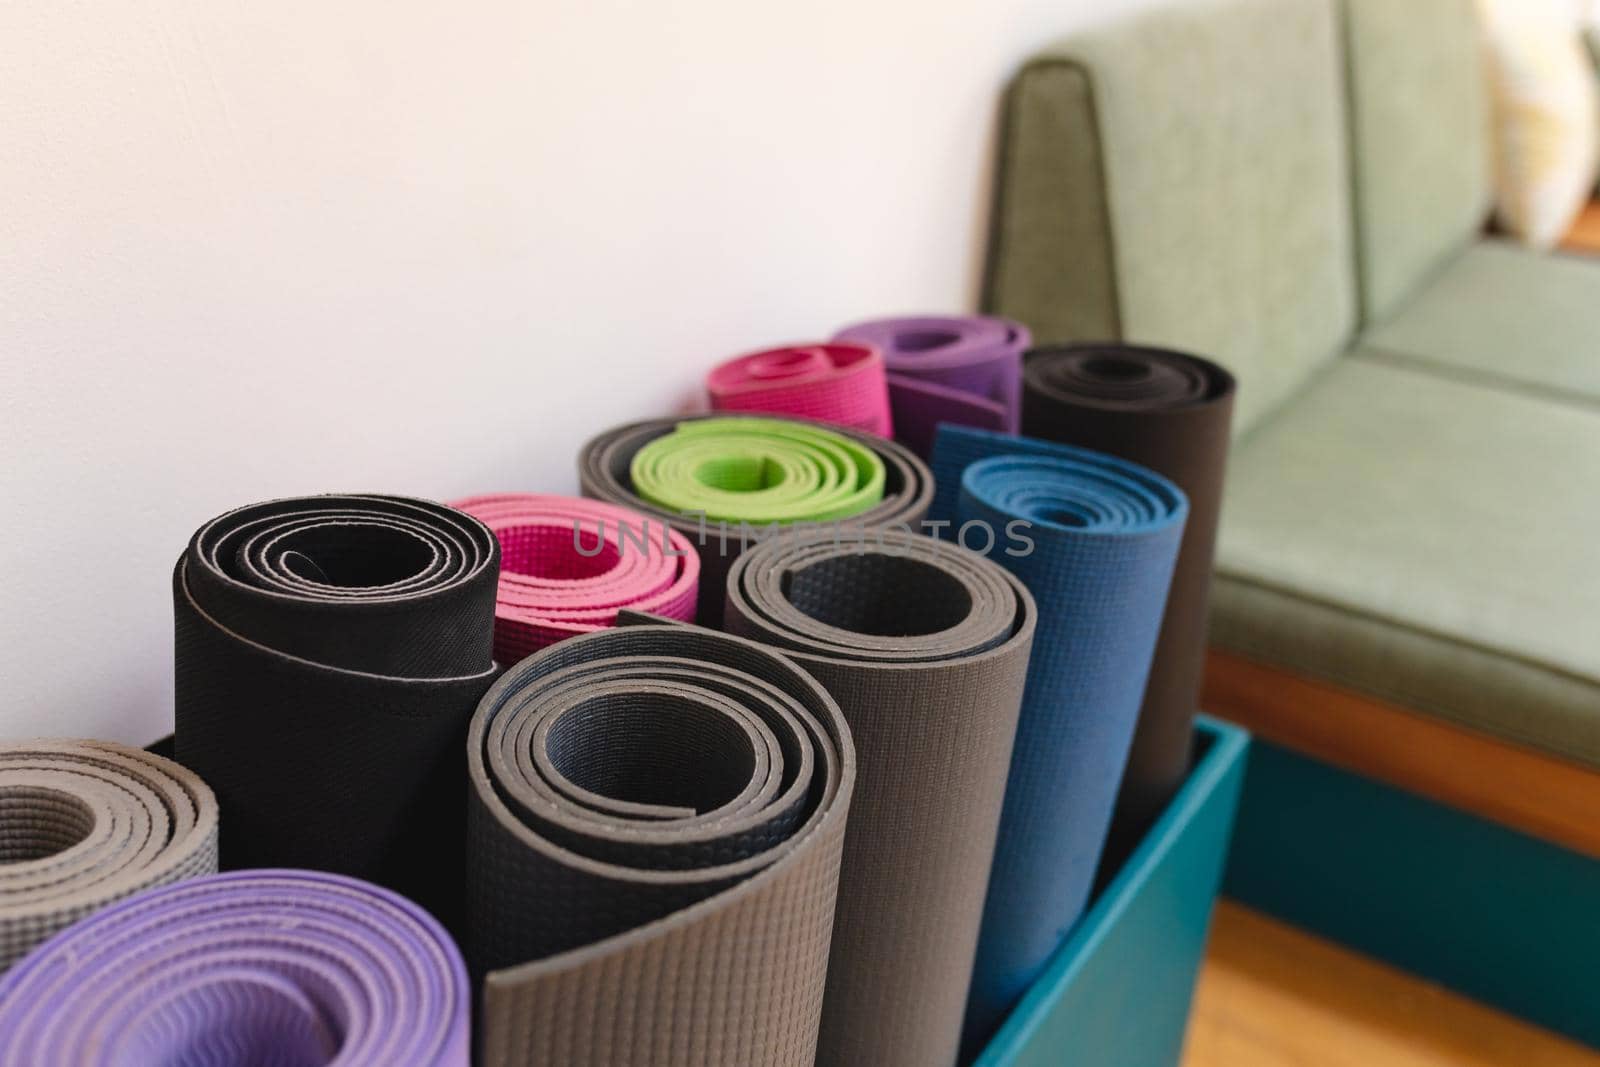 Closeup of rolled up colorful exercise mats in yoga studio. fitness, yoga and healthy lifestyle.